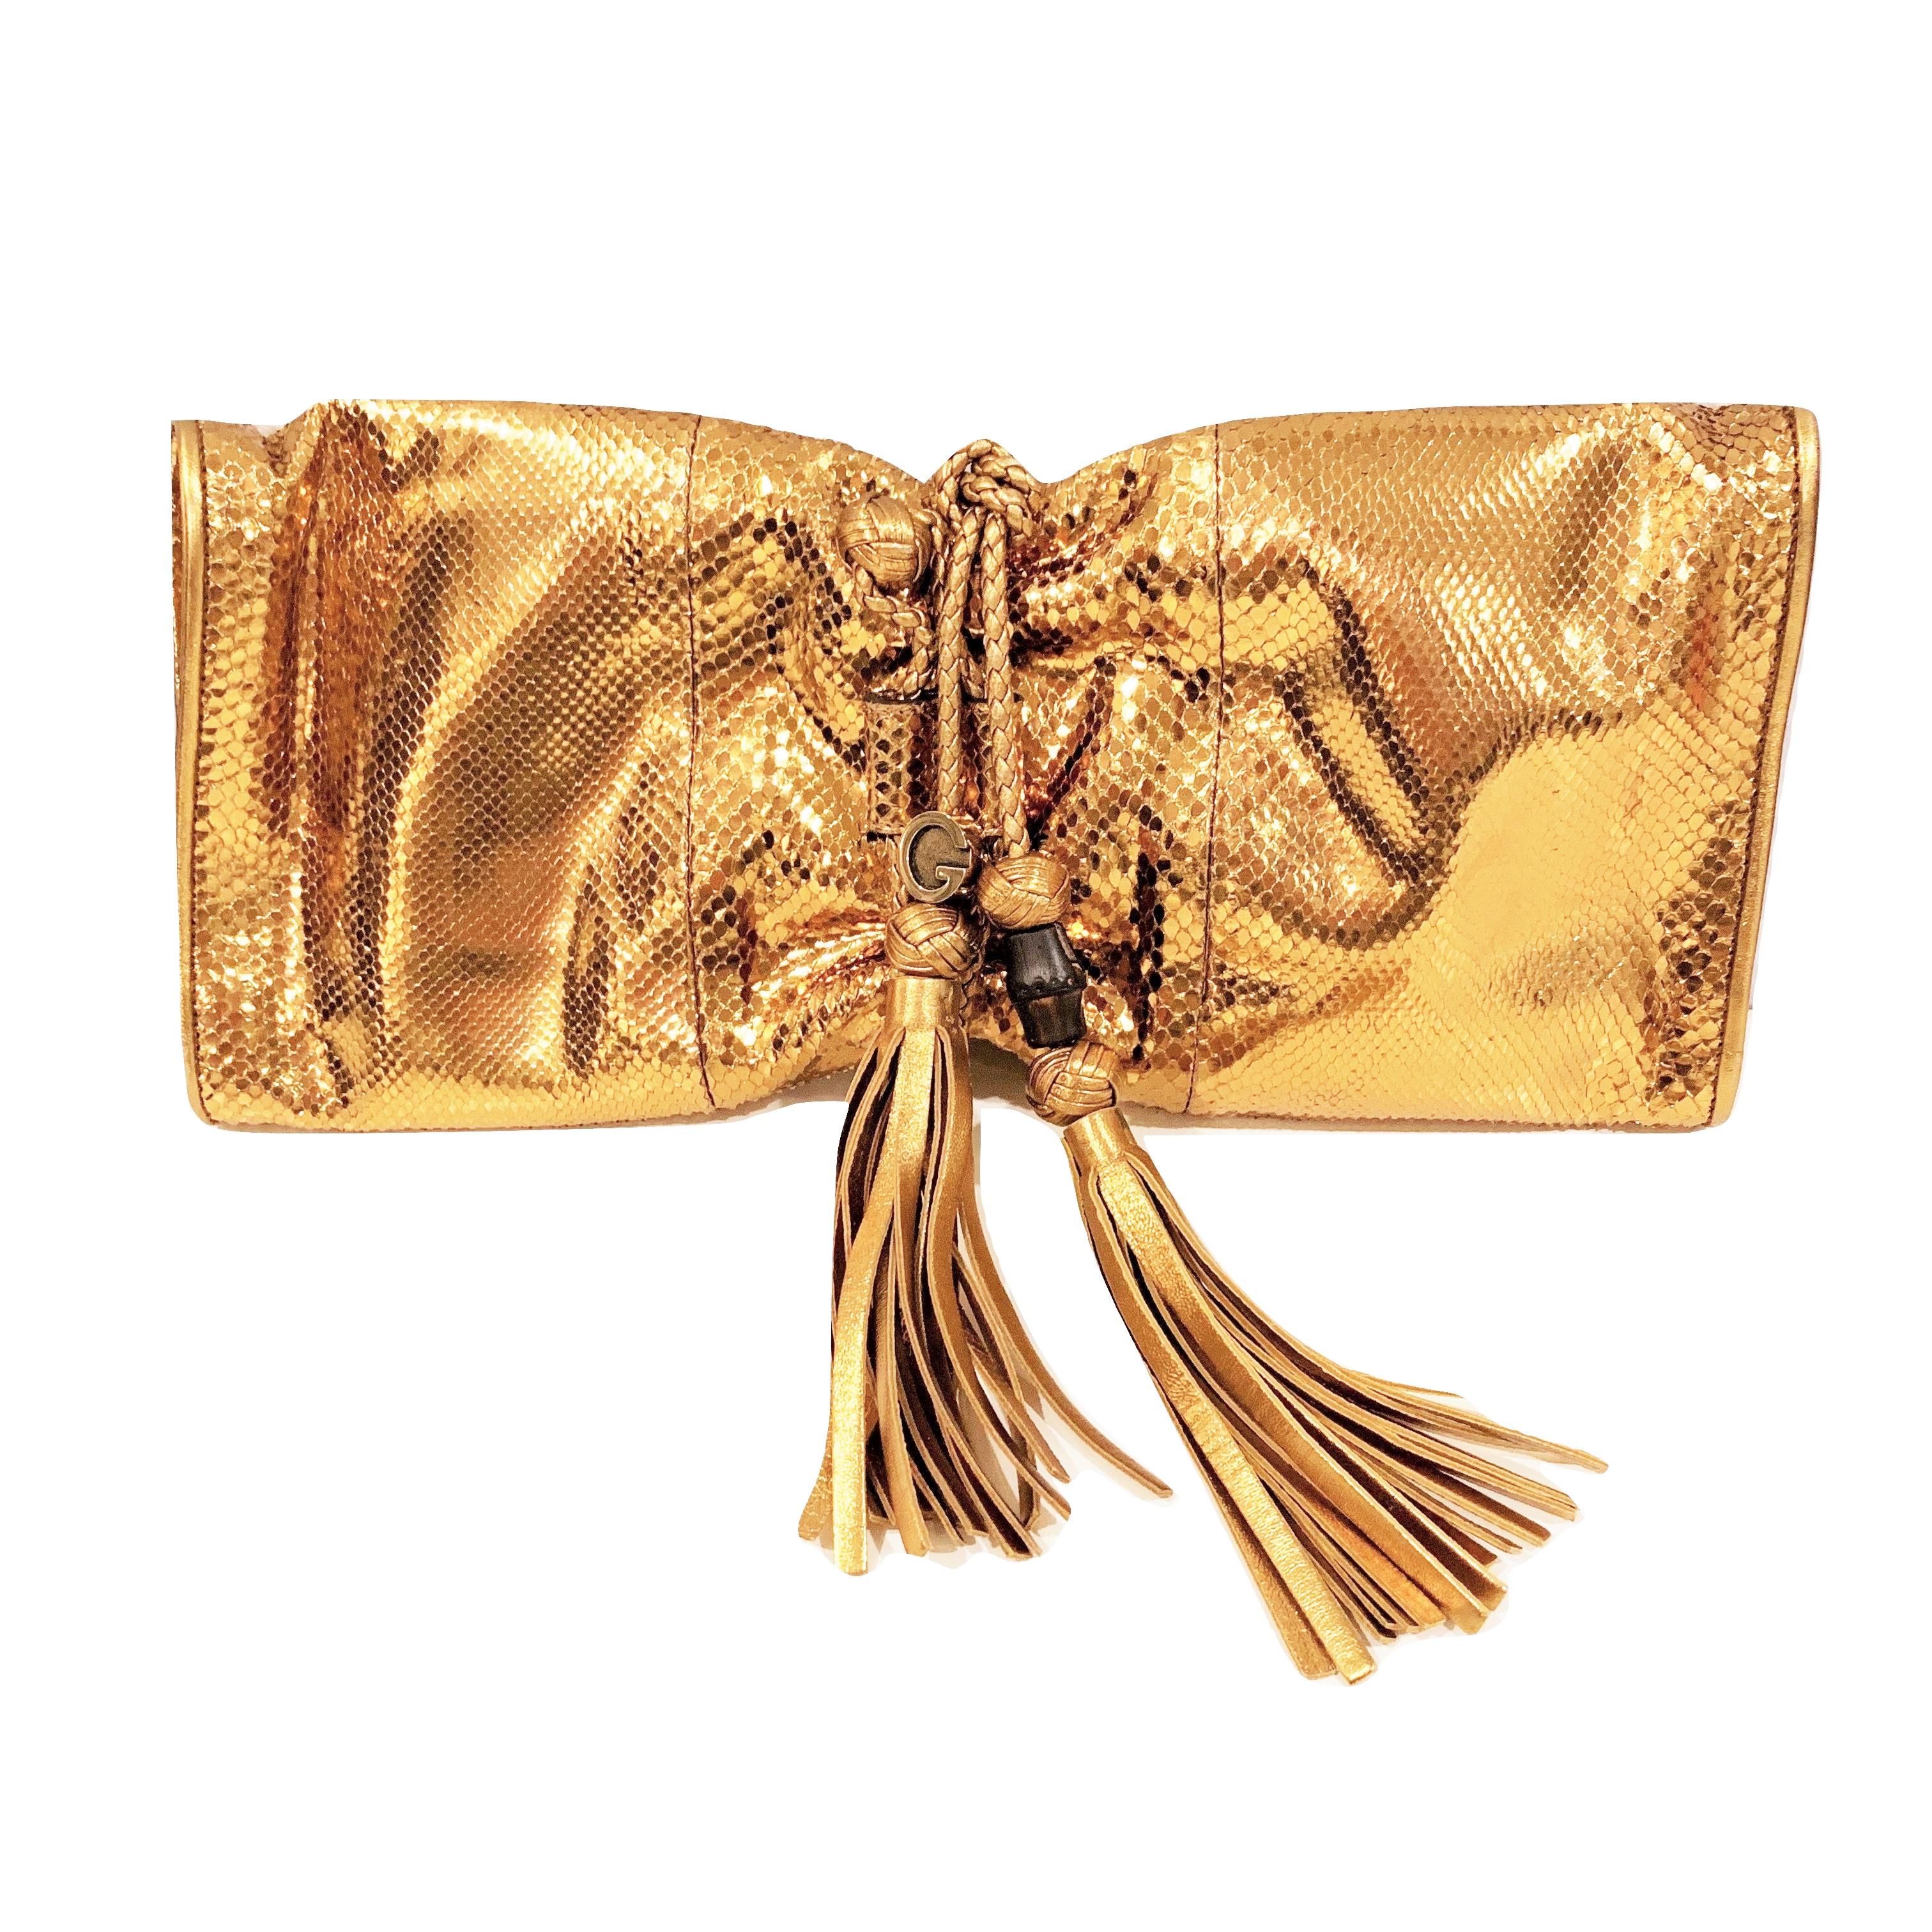 New Gucci Malika Large Python Clutch Bag in Gold As Seen on J-Lo & Kim 2